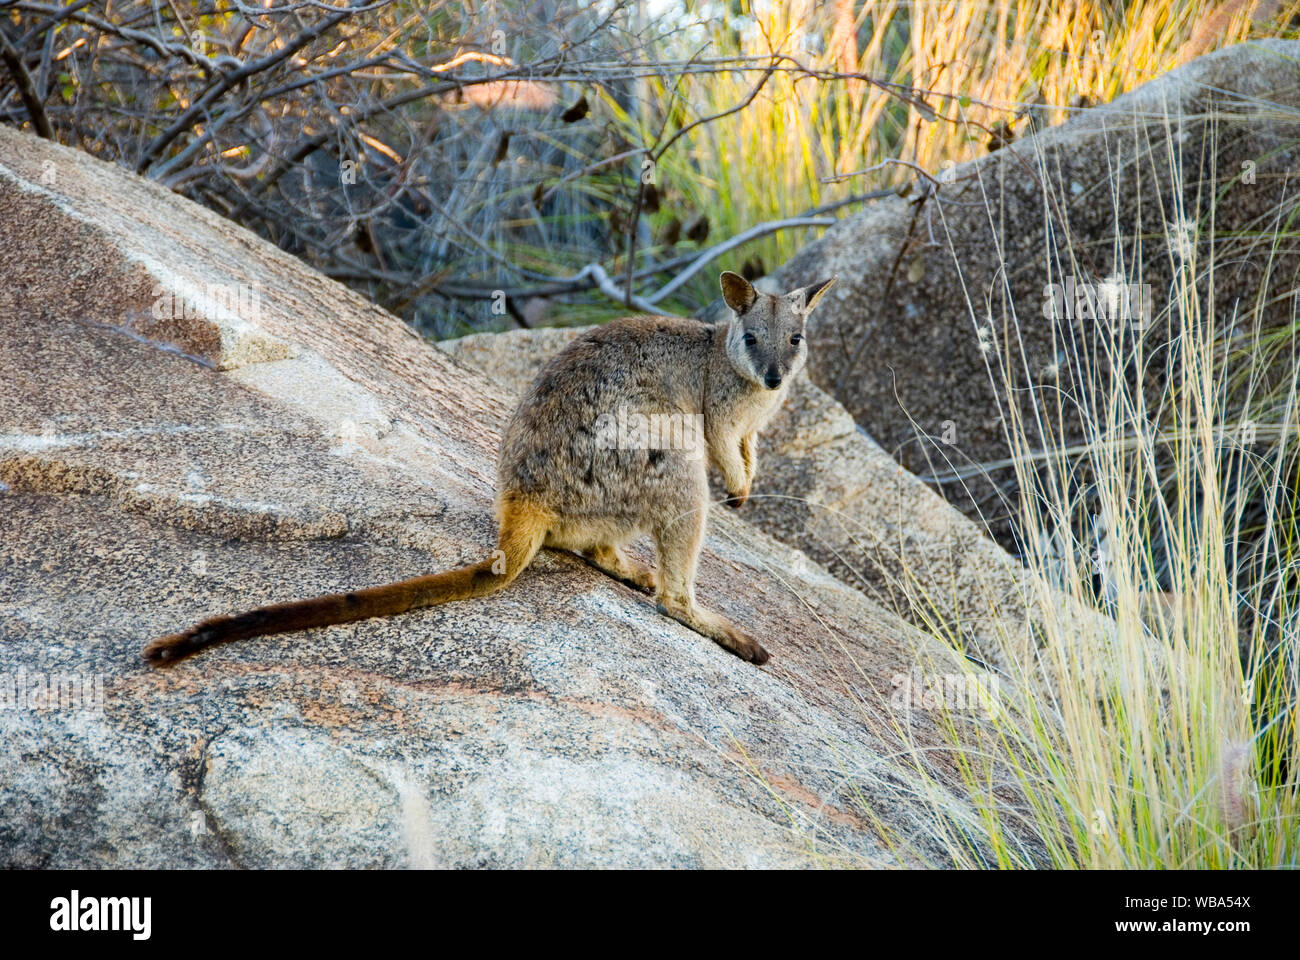 Agile wallaby  (Macropus agilis),  on a boulder.  Charters Towers, Queensland, Australia Stock Photo